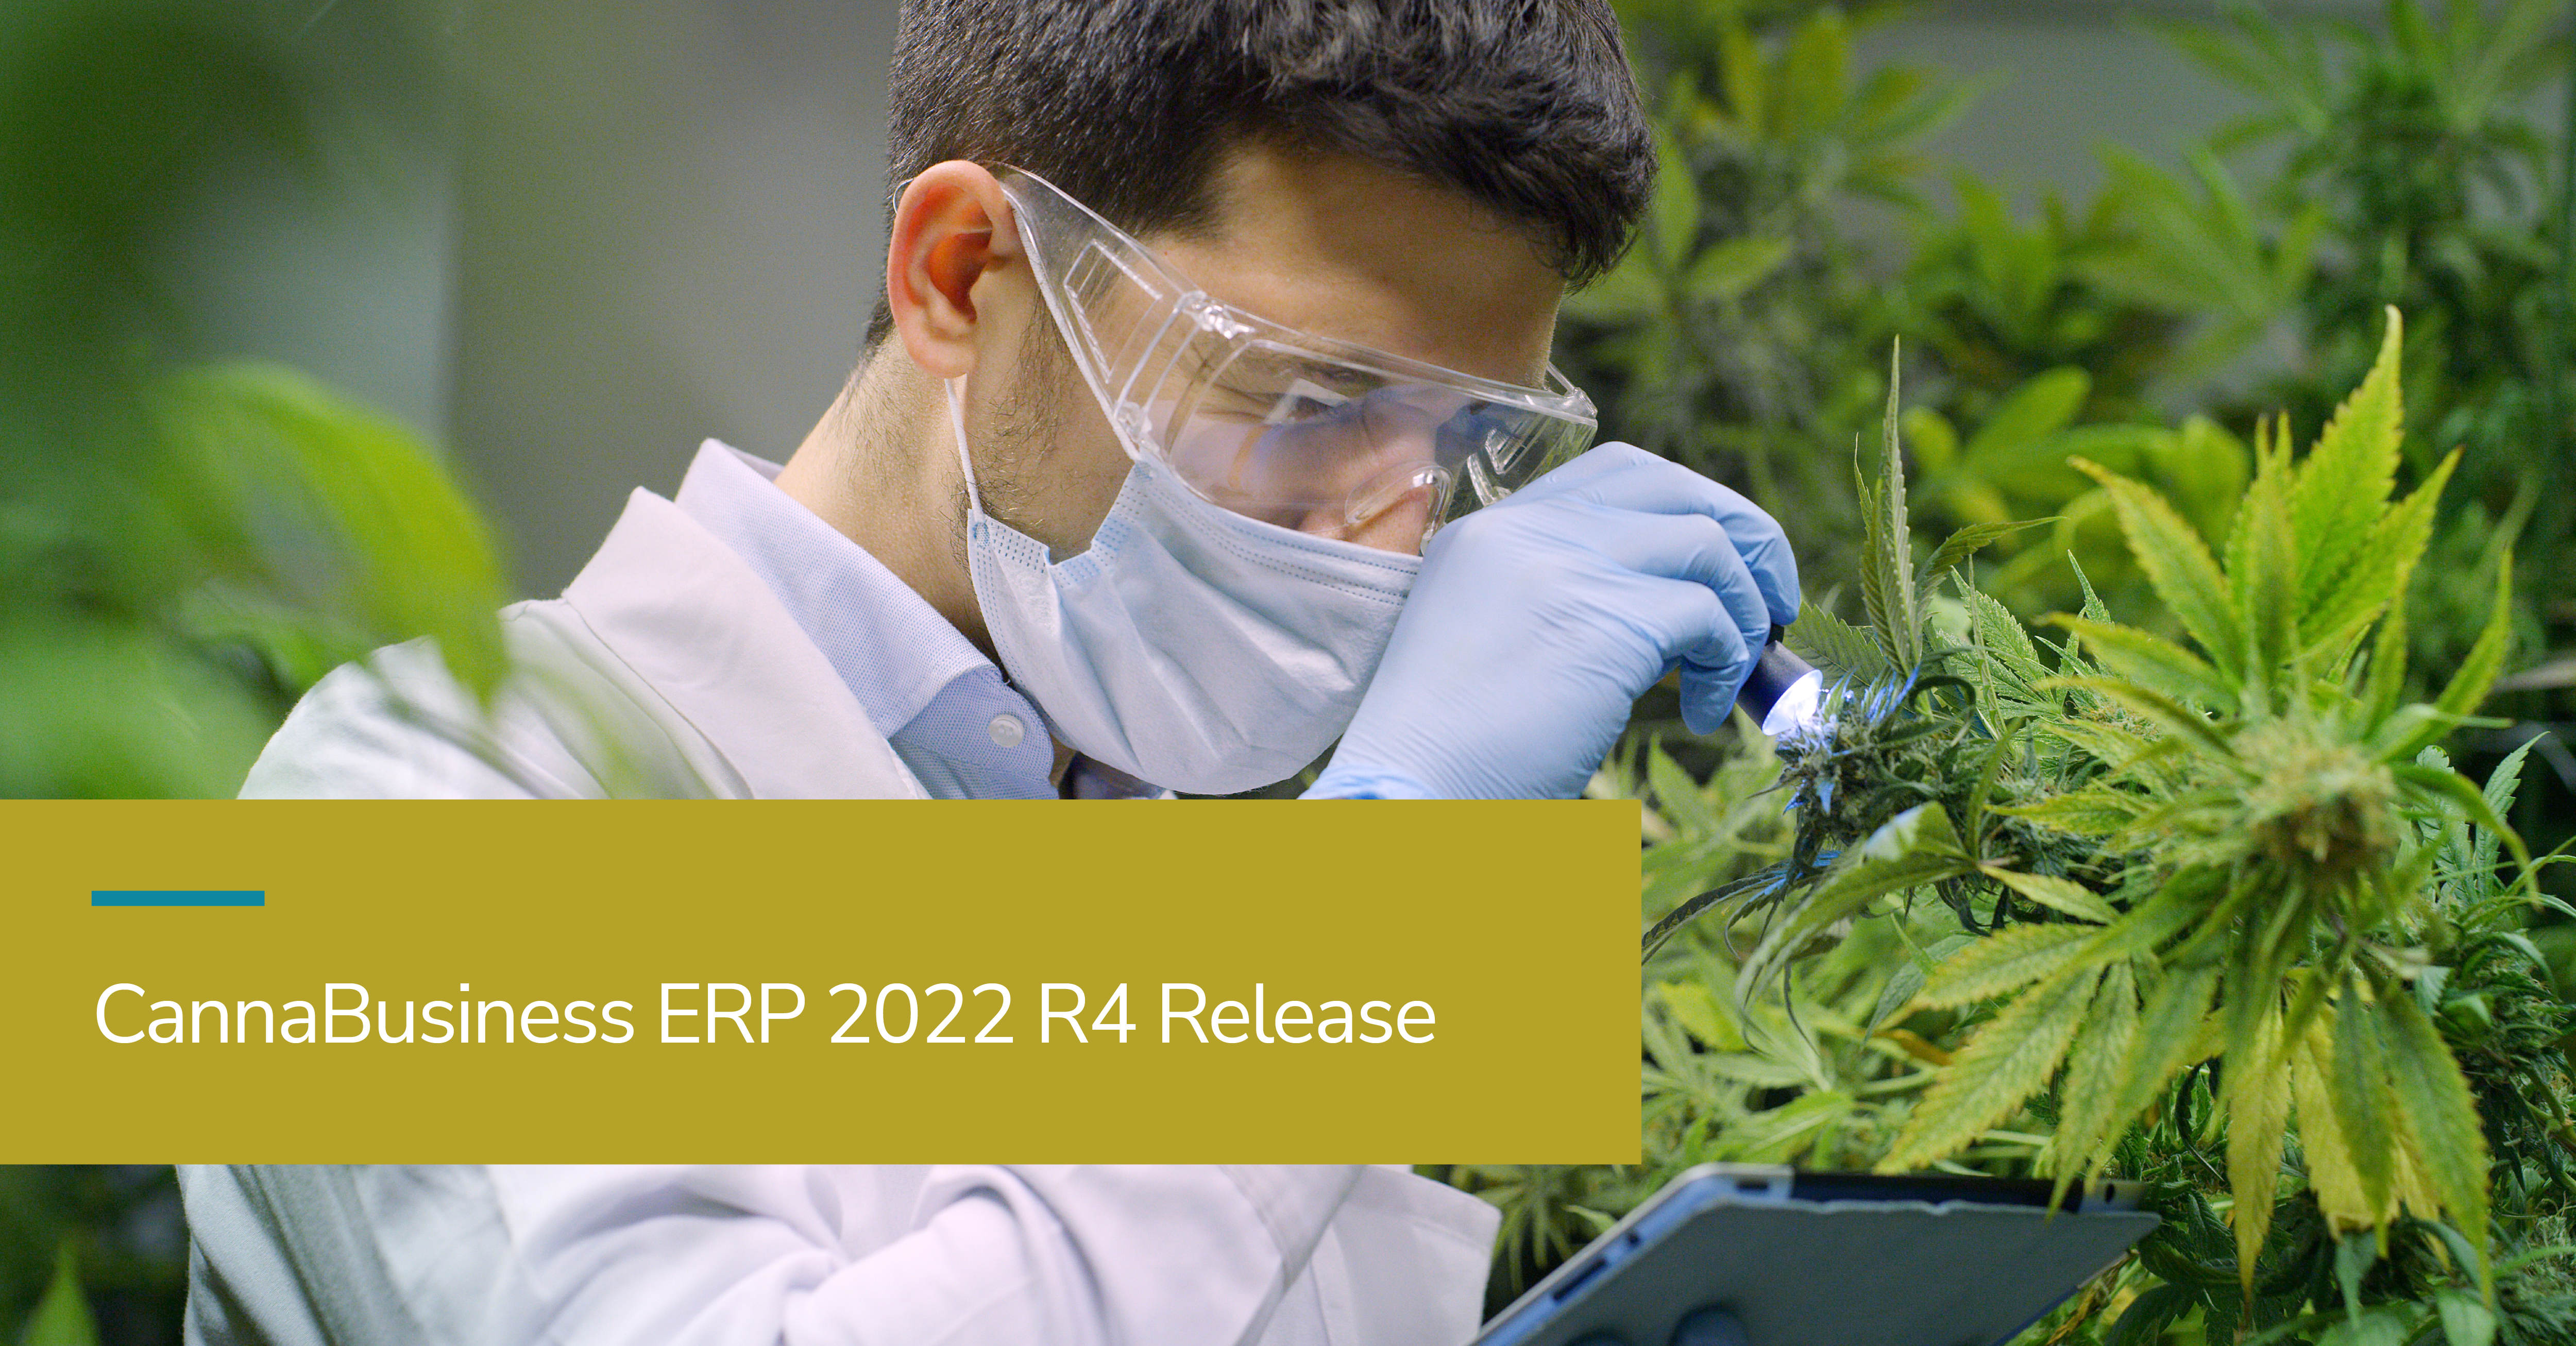 CannaBusiness R4 Release 2022